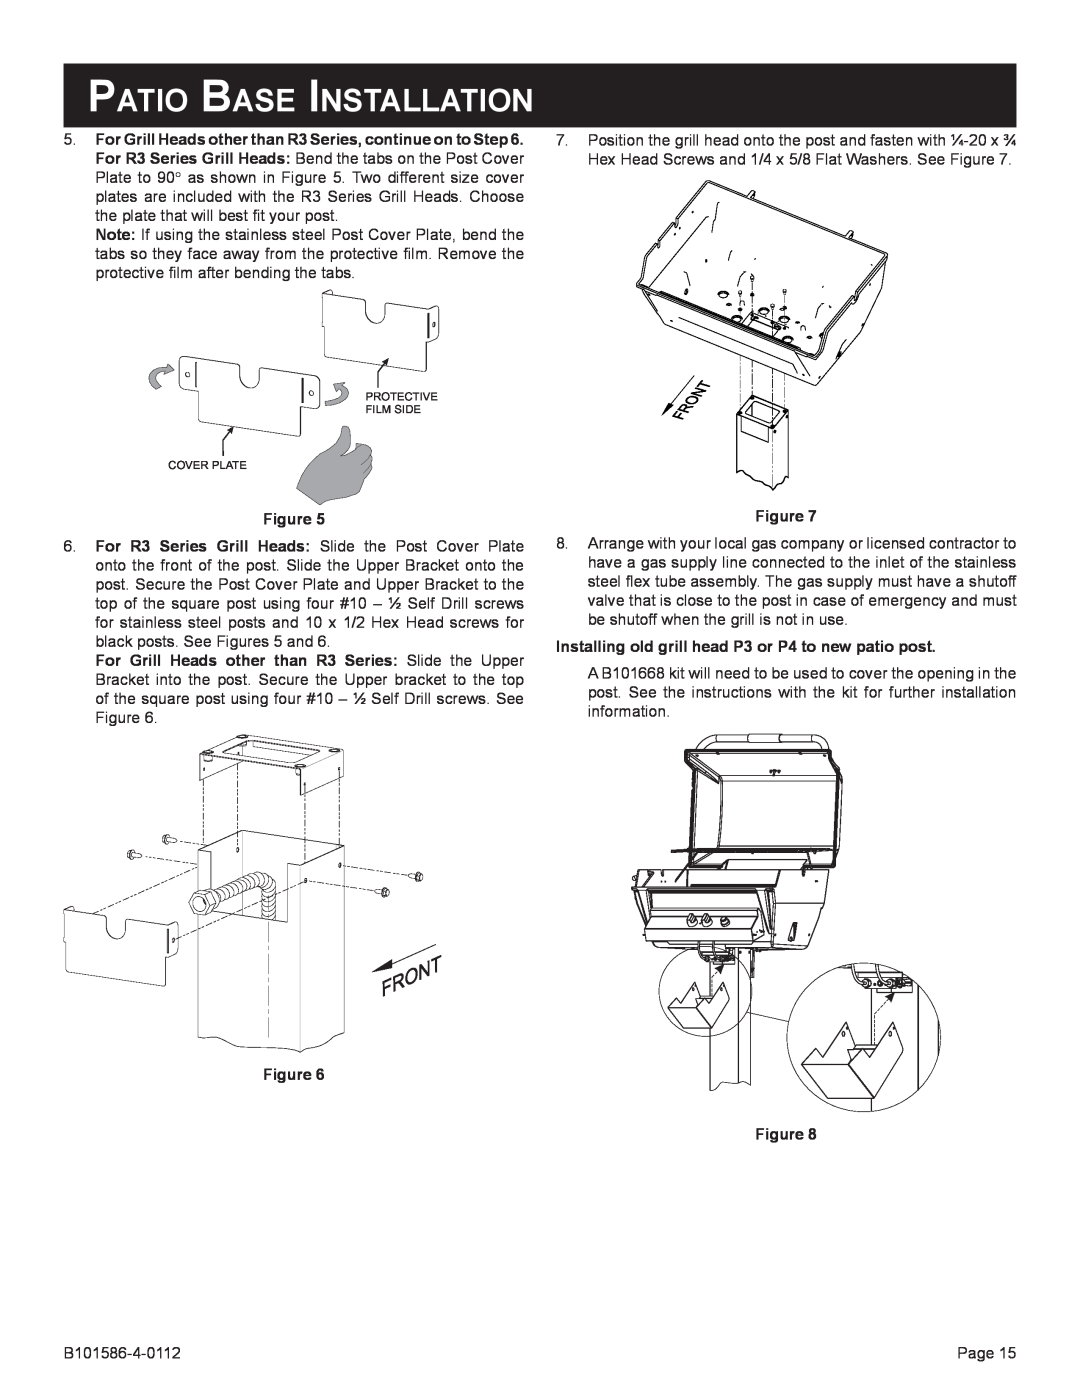 Broilmaster B101586-4-0112, DCB1-2, SS26P-1 Patio Base Installation, Installing old grill head P3 or P4 to new patio post 